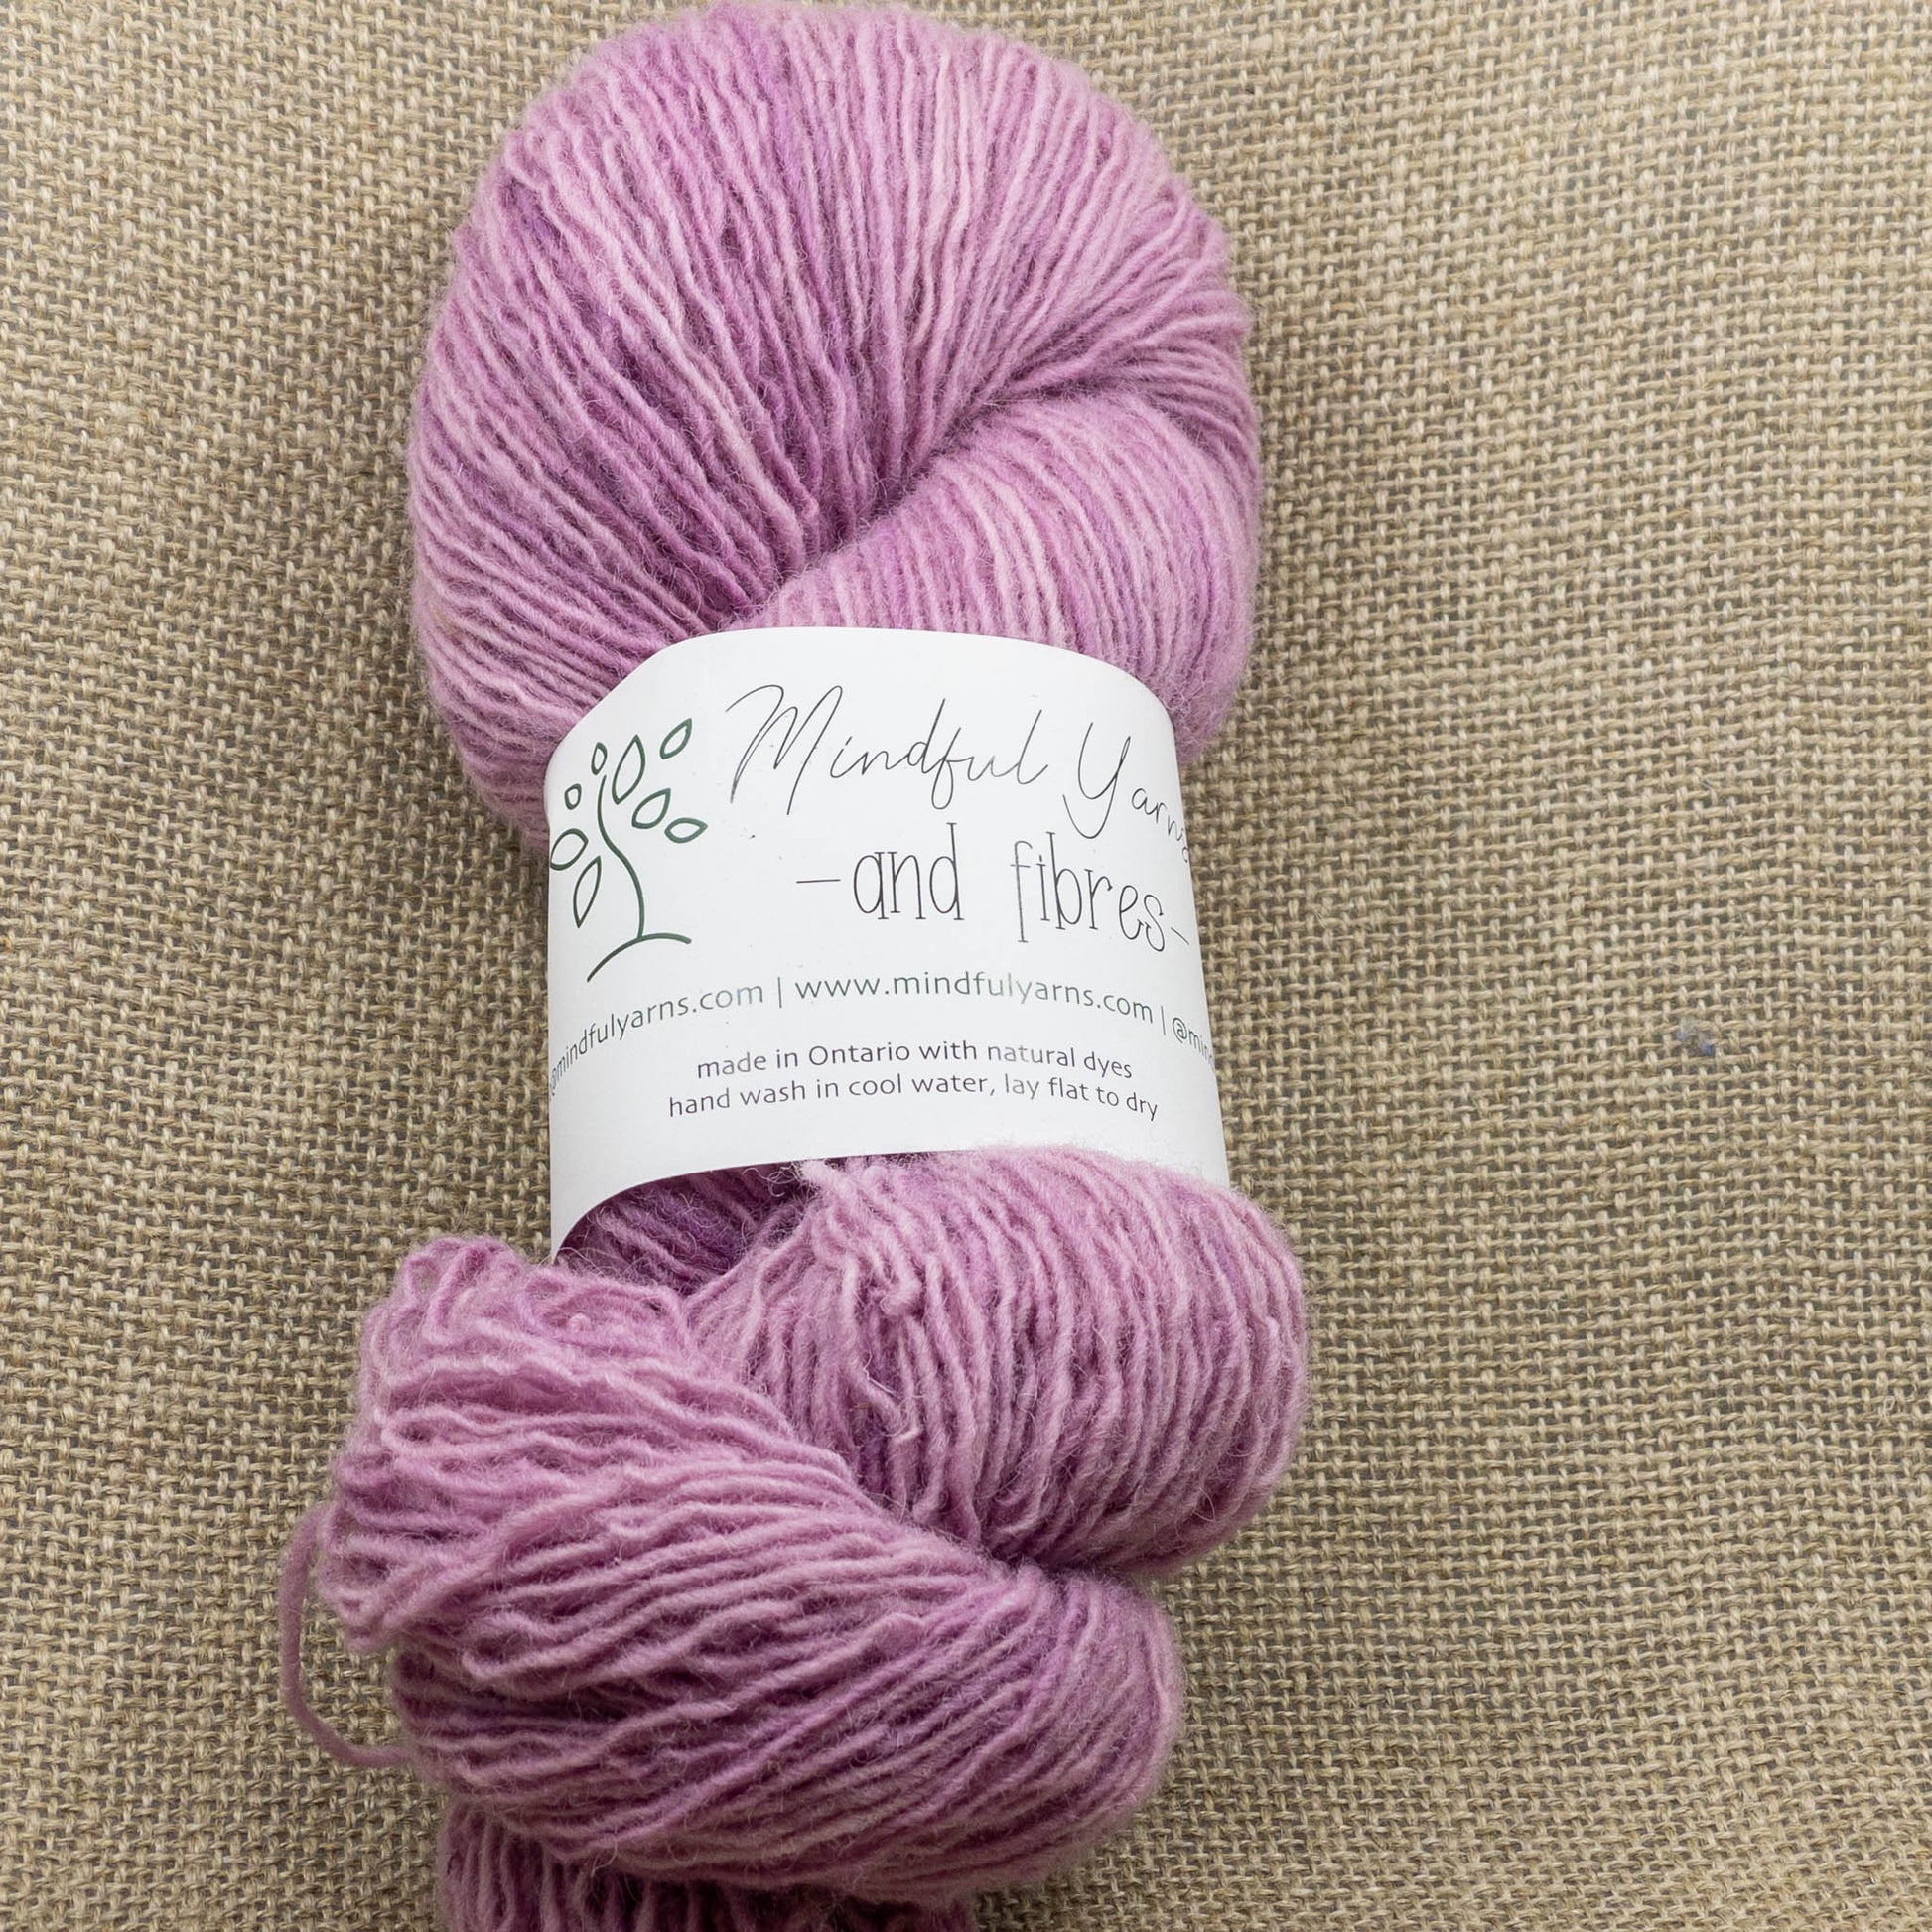 Ontario Single Fingering Weight Wool - Mindful Yarns - Cochineal 1-0410